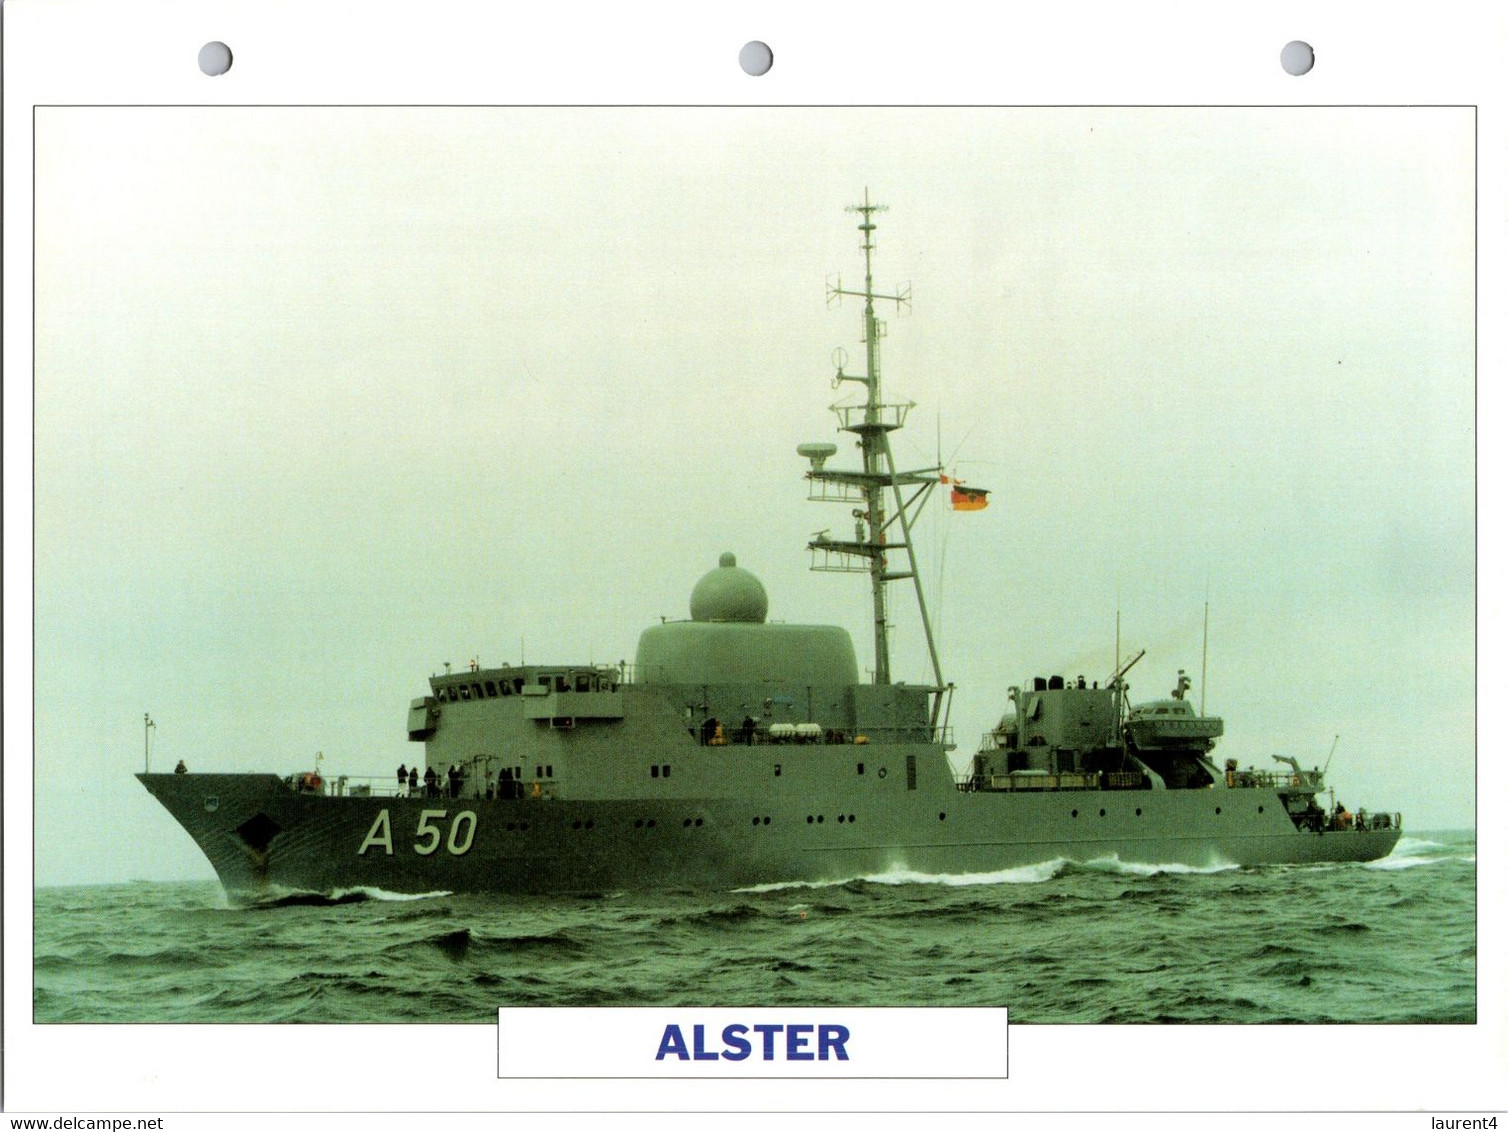 (25 X 19 Cm) (29-9-2021) - V - Photo And Info Sheet On Warship -  Germany Navy - Alster - Bateaux